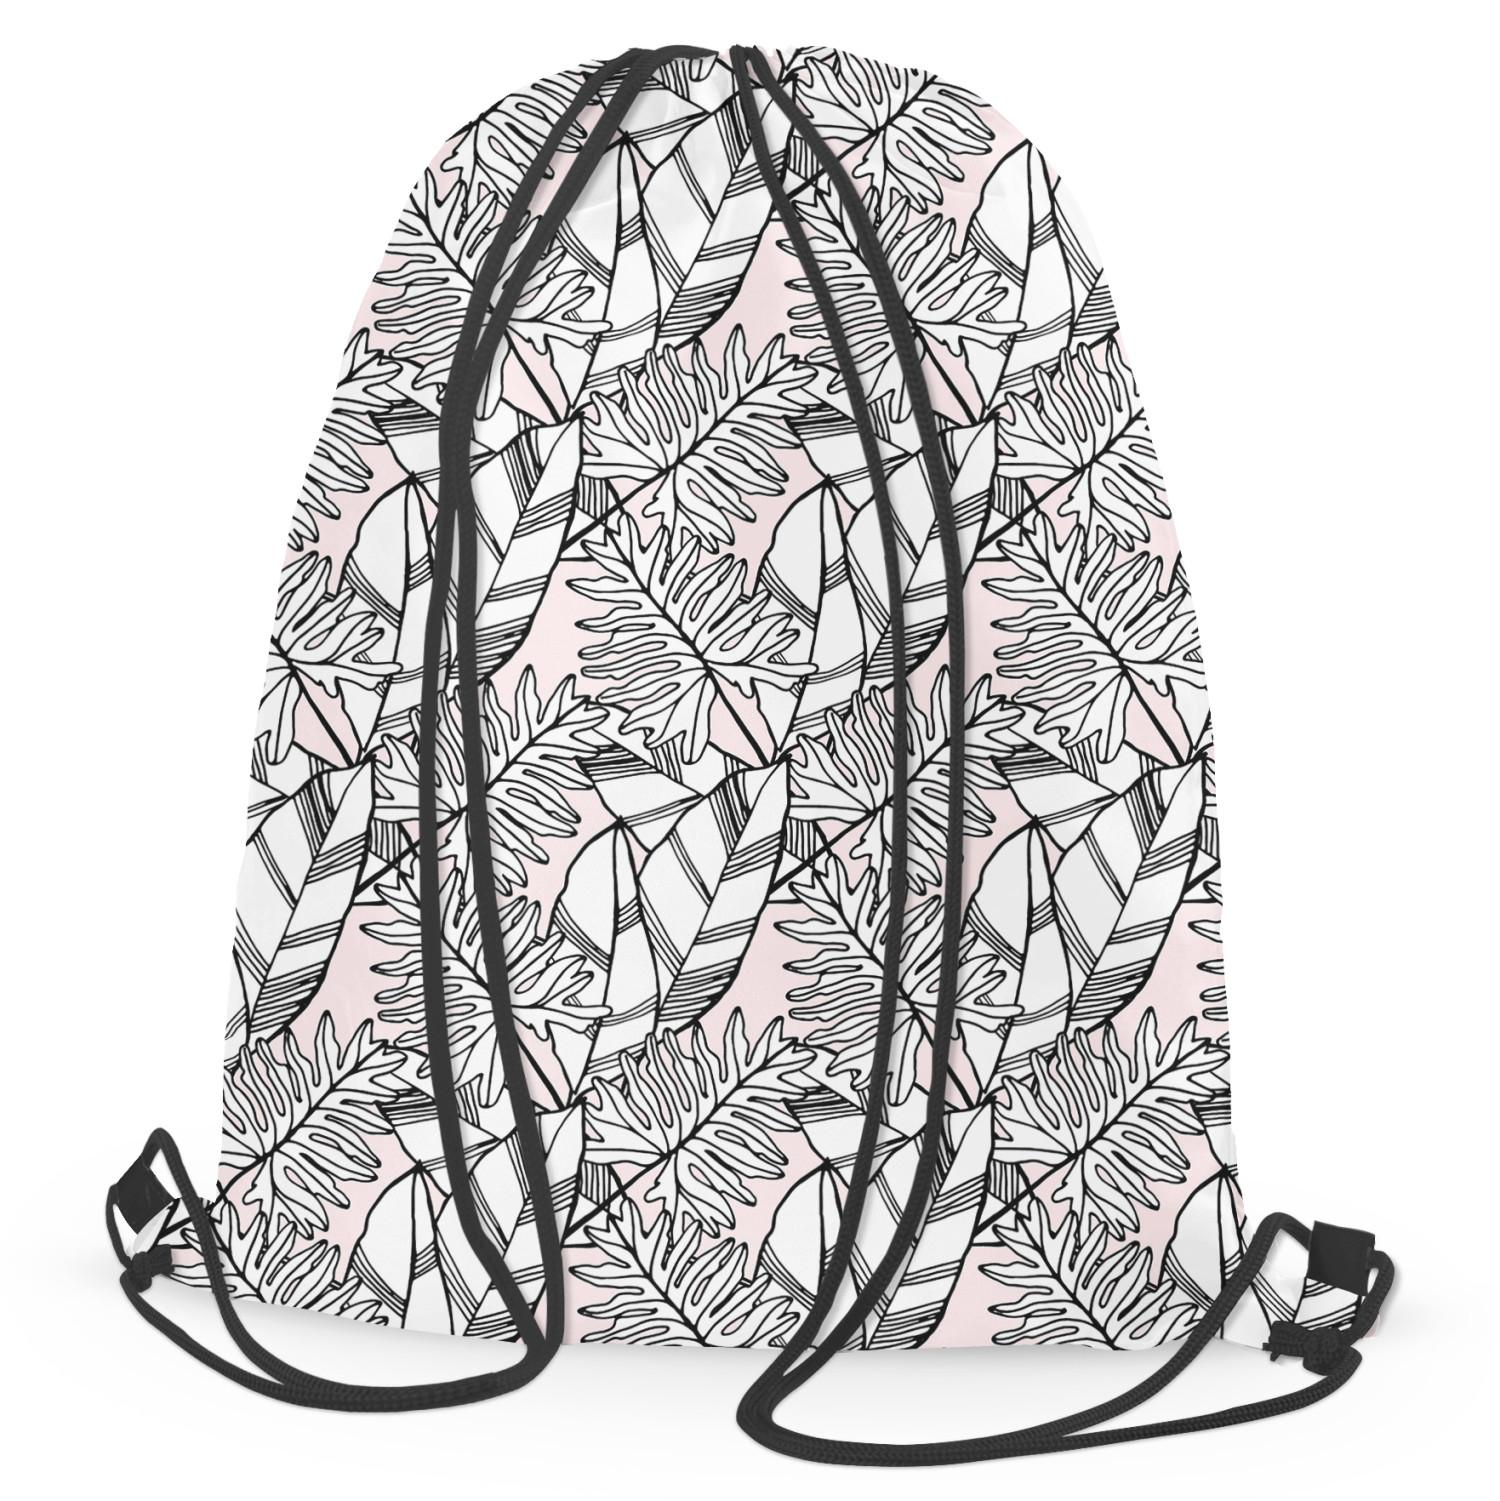 Mochila Leafy mauresque - black and white floral pattern in linear style